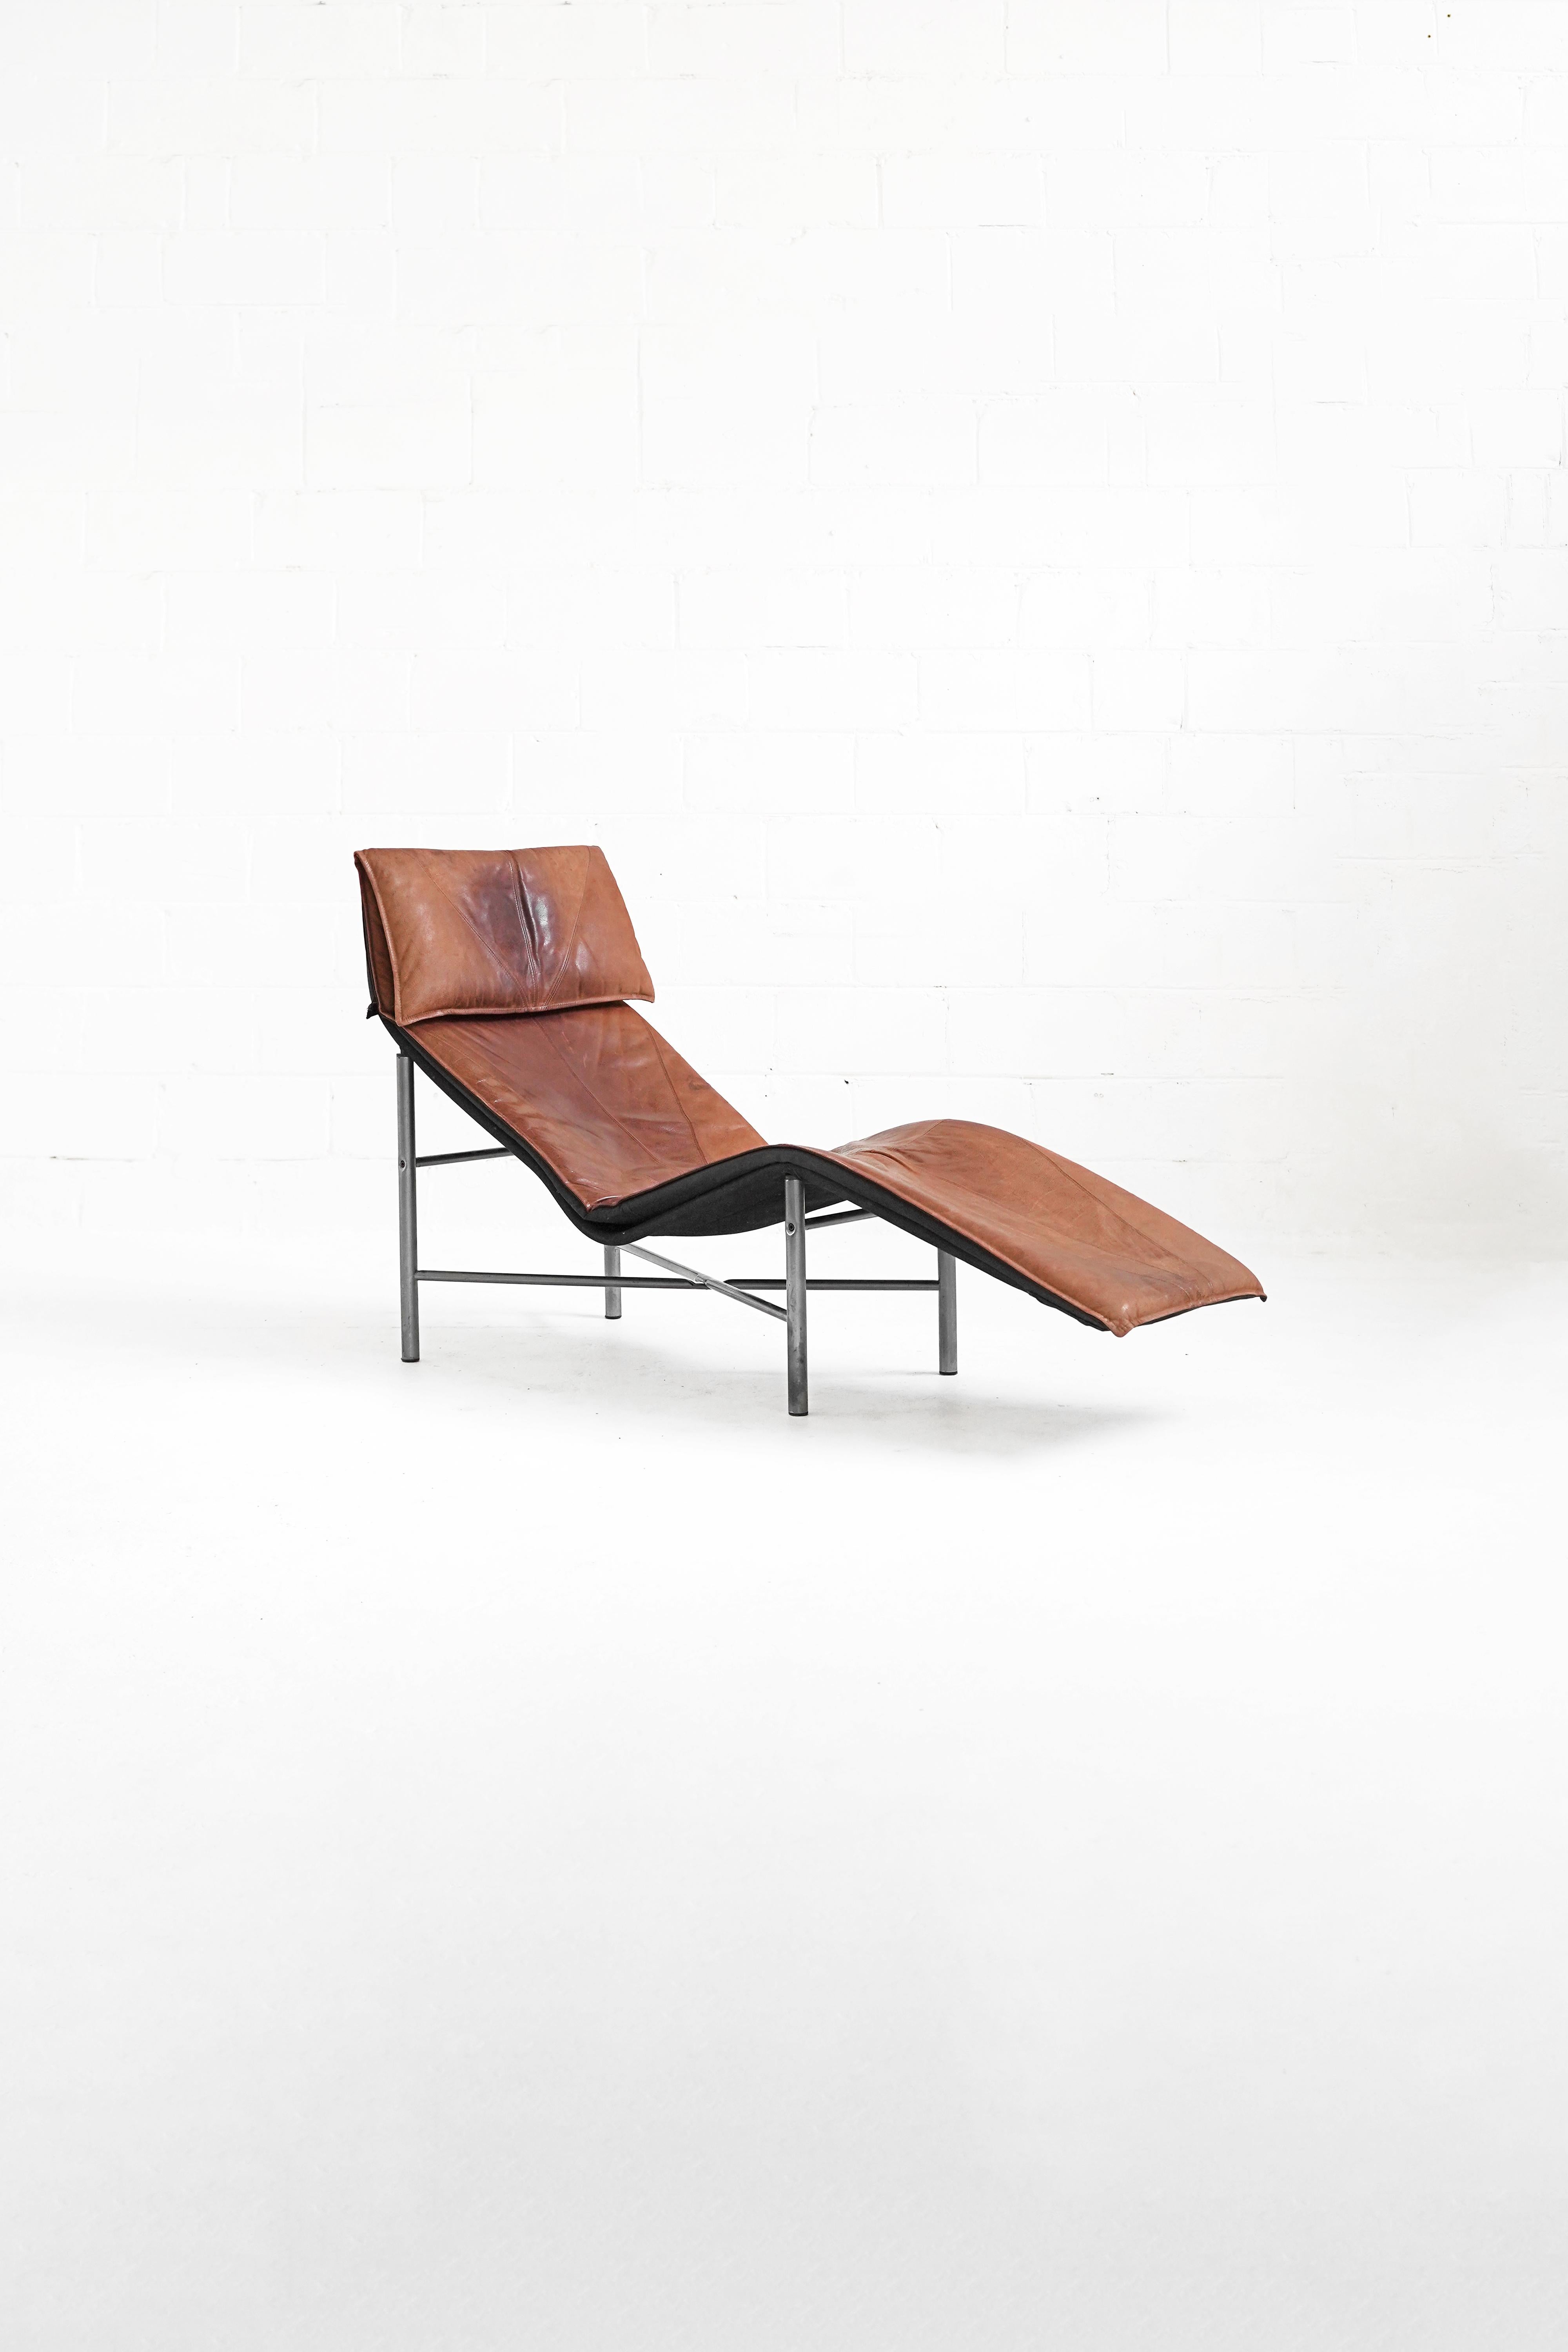 Late 20th Century Skye Lounge Chair by Tord Björklund for Ikea